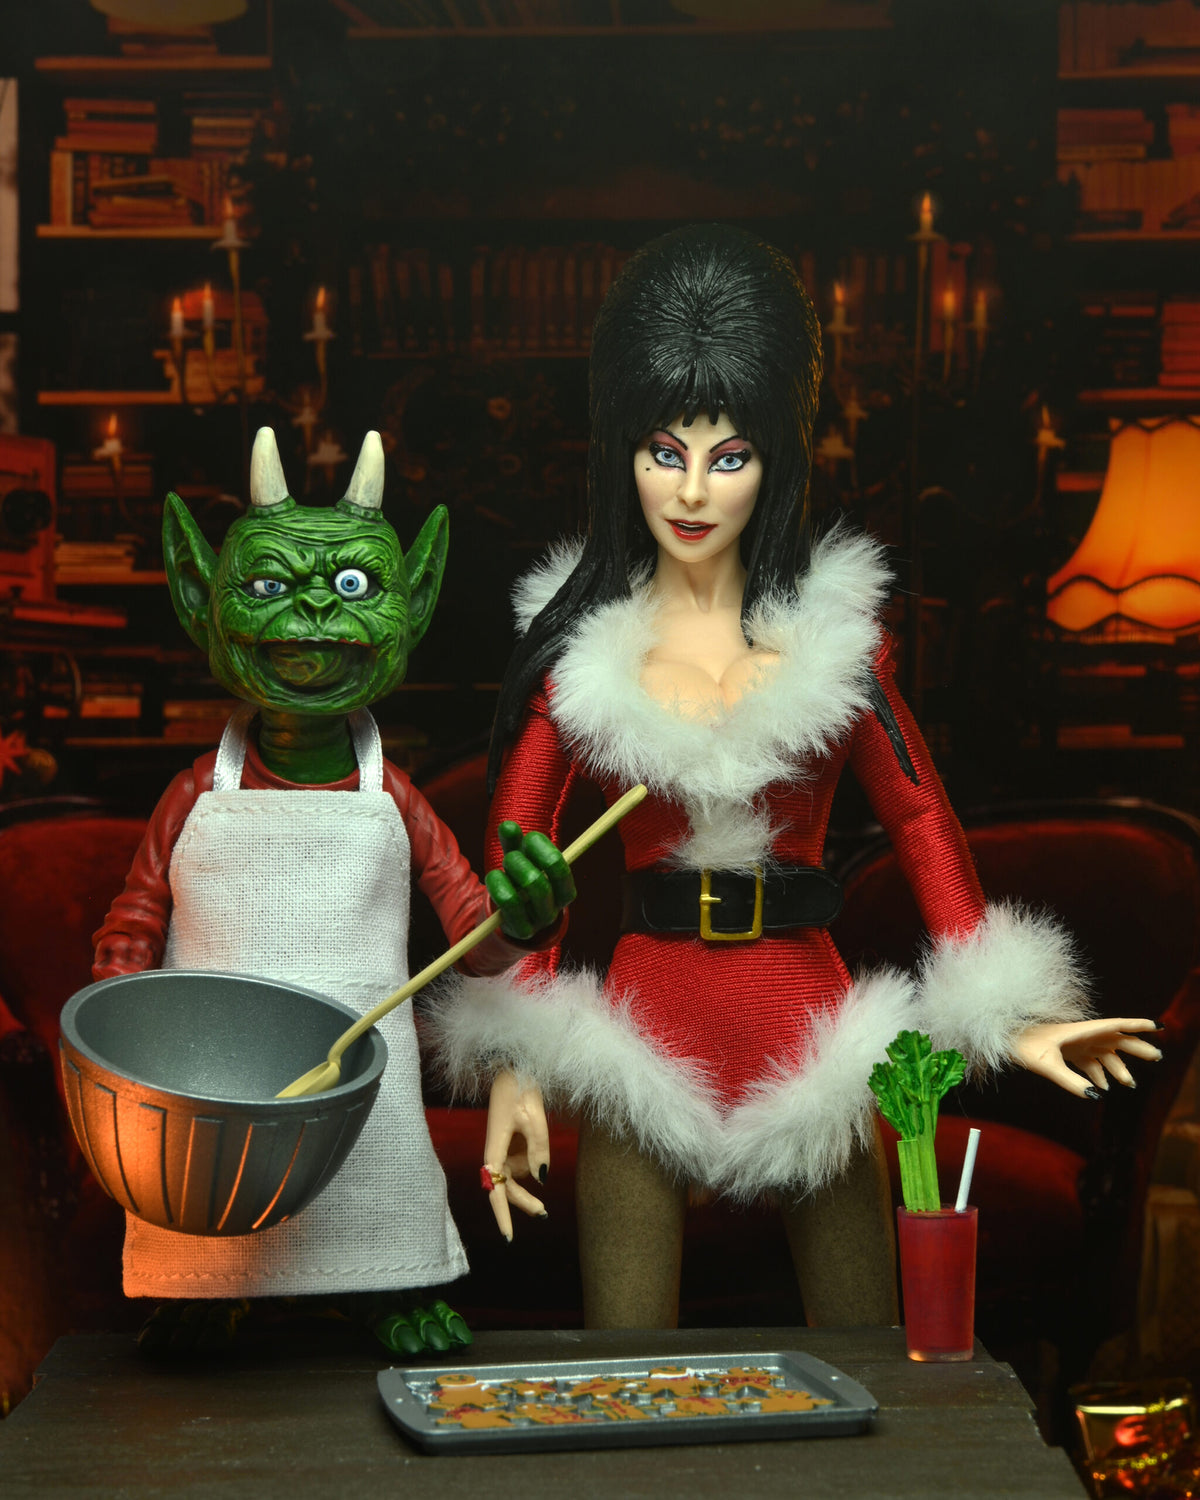 NECA - Elvira's Very Scary Xmas 8" Clothed Action Figure (Pre-Order Ships October)